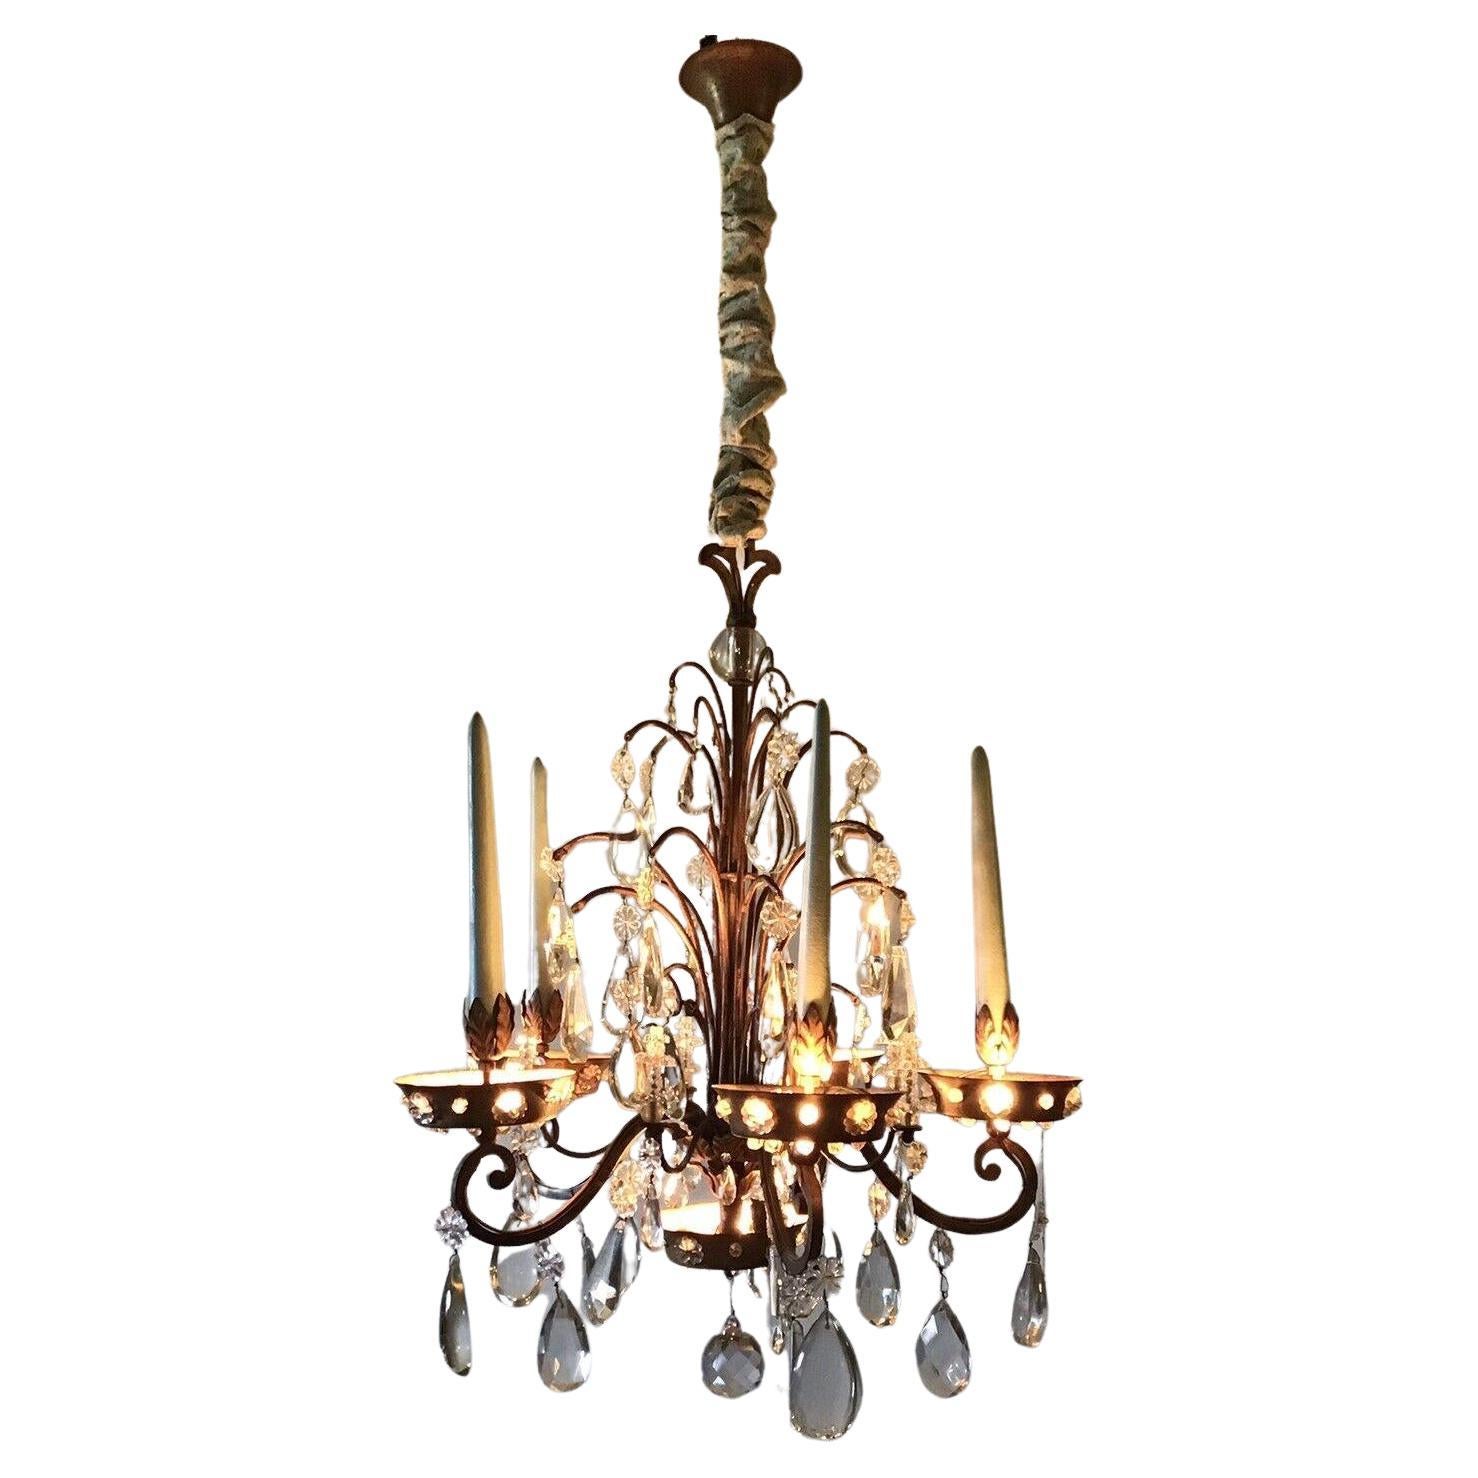 This is a very special chandelier. 1920's French Louis XVI Rococo Form Crystal w/ Wrought Iron Chandelier. There is electric light emanating from the crystal studded bobesche. I was told chandeliers of this type were used in the Rococo era as a